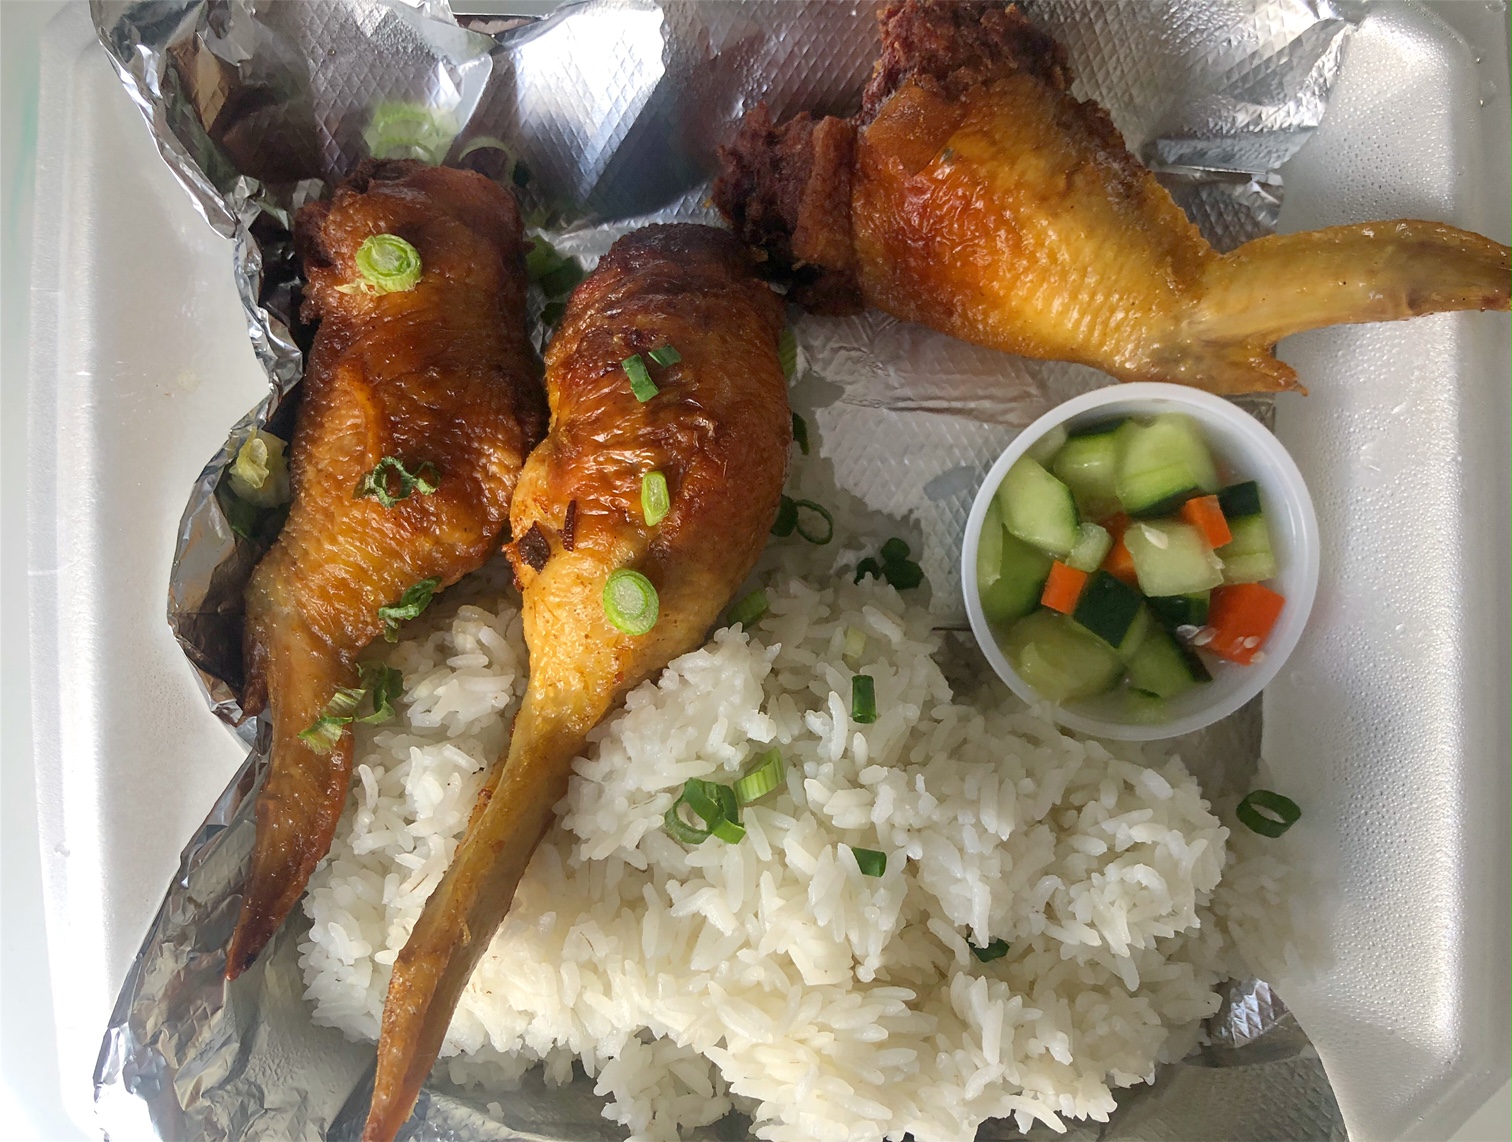 The stuffed wings meal from A Taste of Both Worlds has three wings with steamed rice and a small cup of cucumber salad. Photo by Alyssa Buckley.